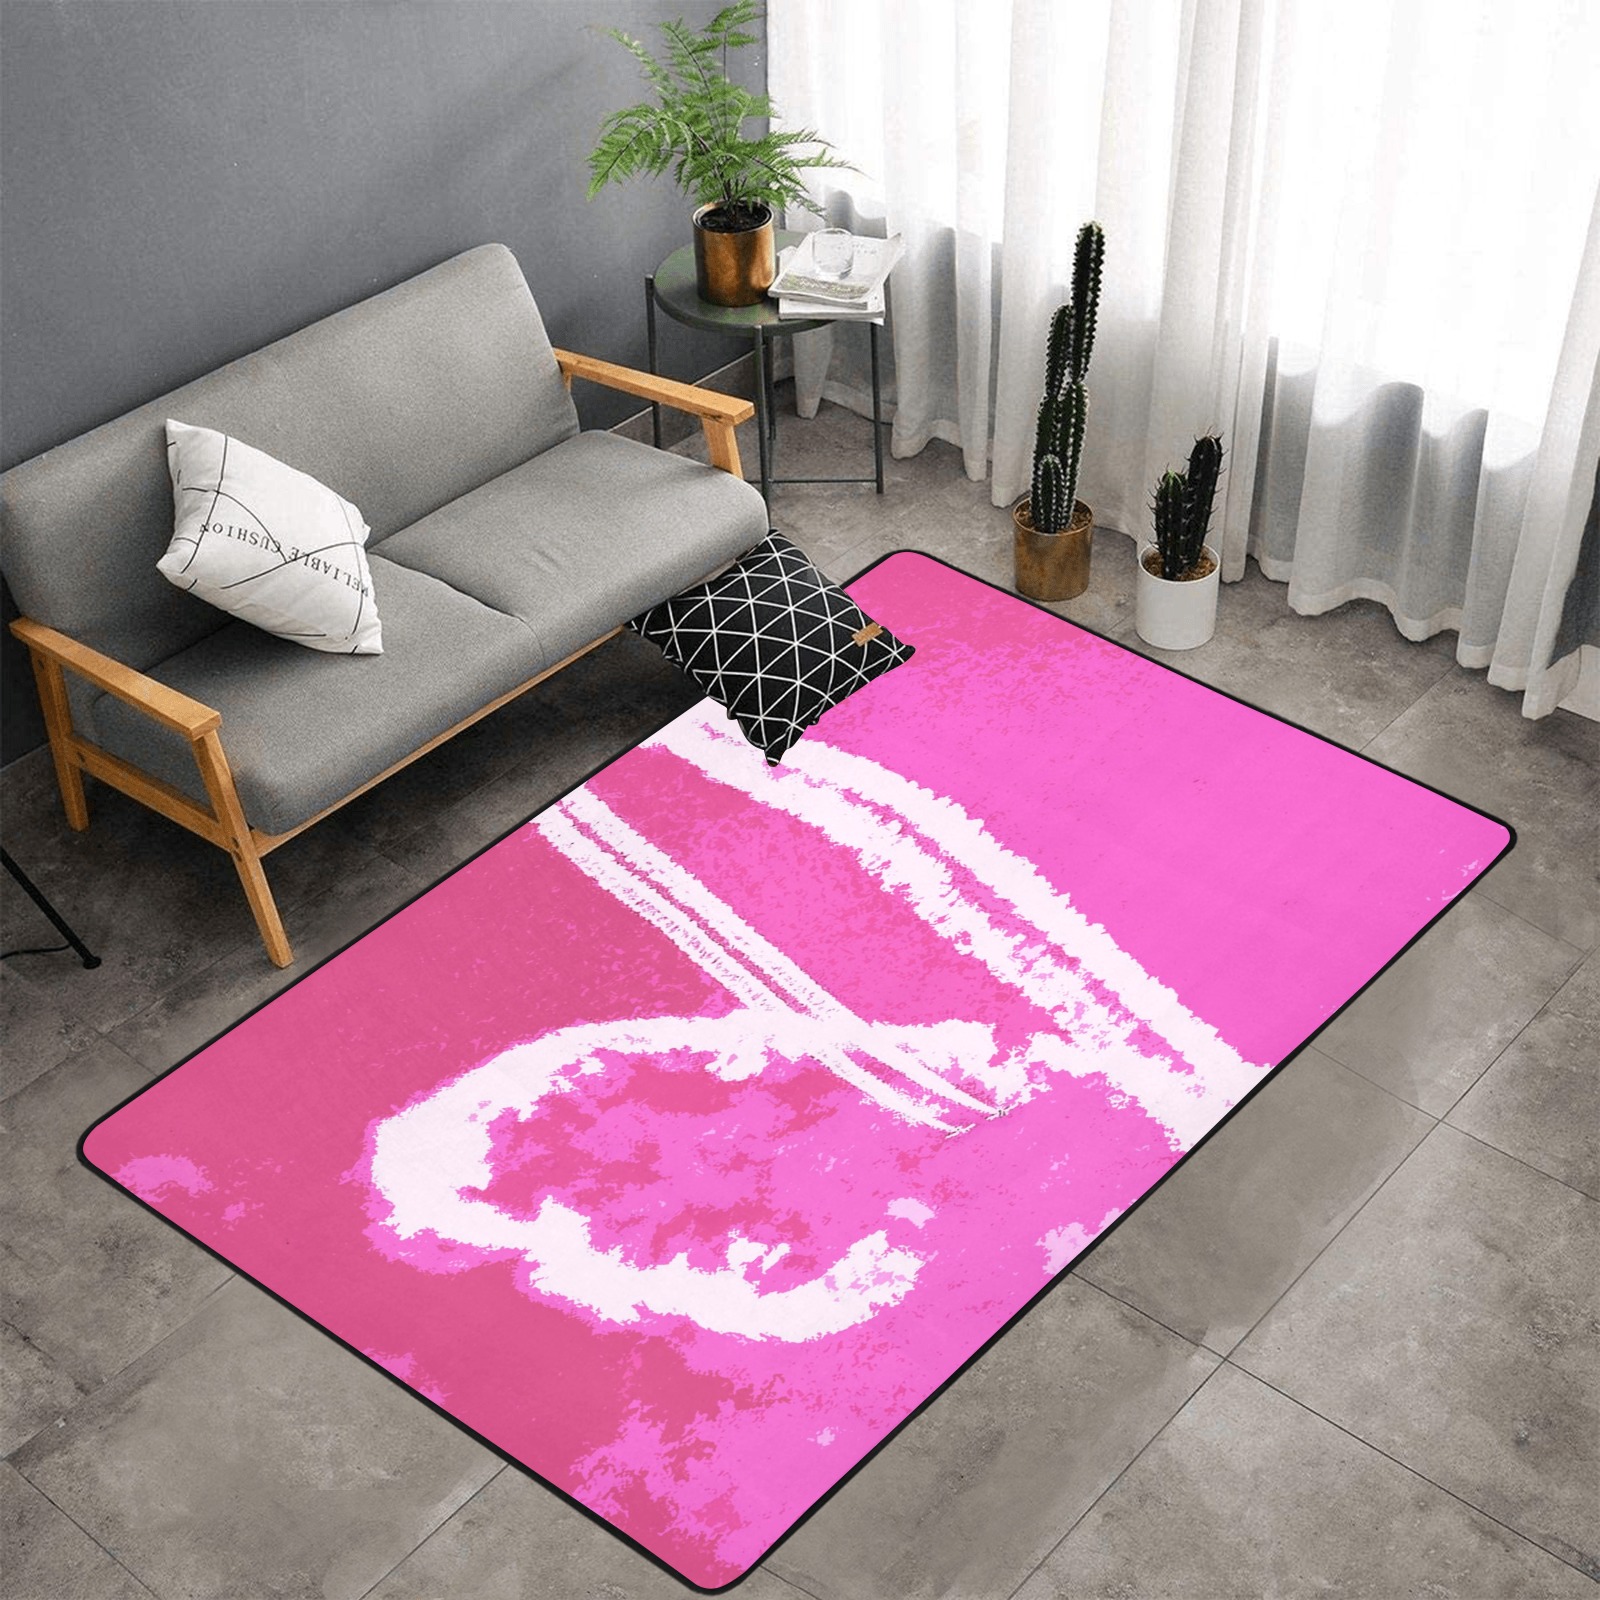 Airplane Heart Pink Area Rug with Black Binding 7'x5'